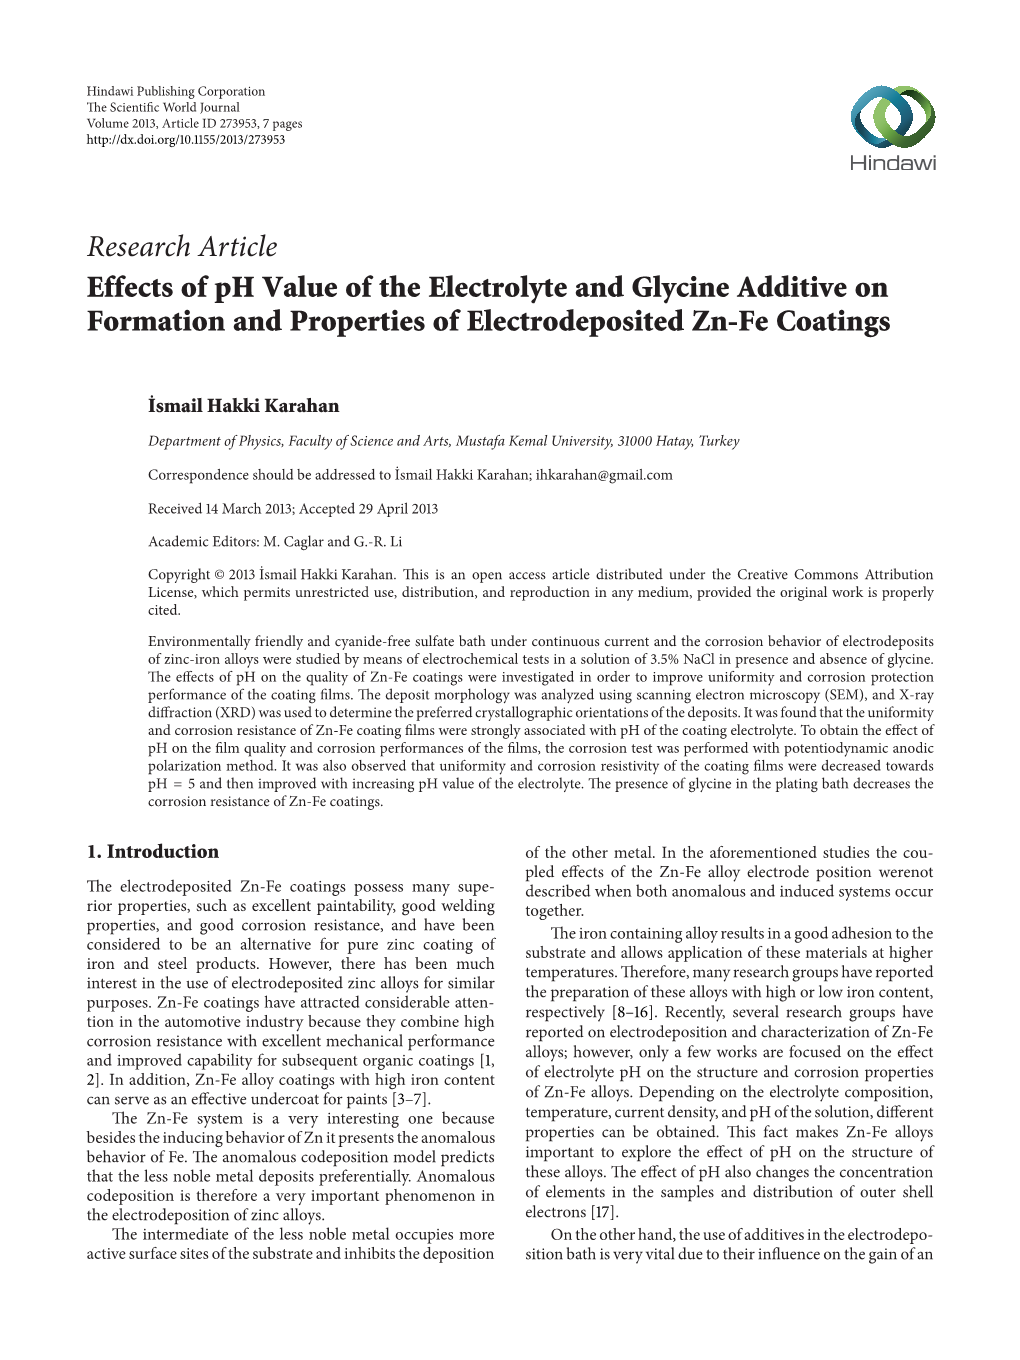 Research Article Effects of Ph Value of the Electrolyte and Glycine Additive on Formation and Properties of Electrodeposited Zn-Fe Coatings